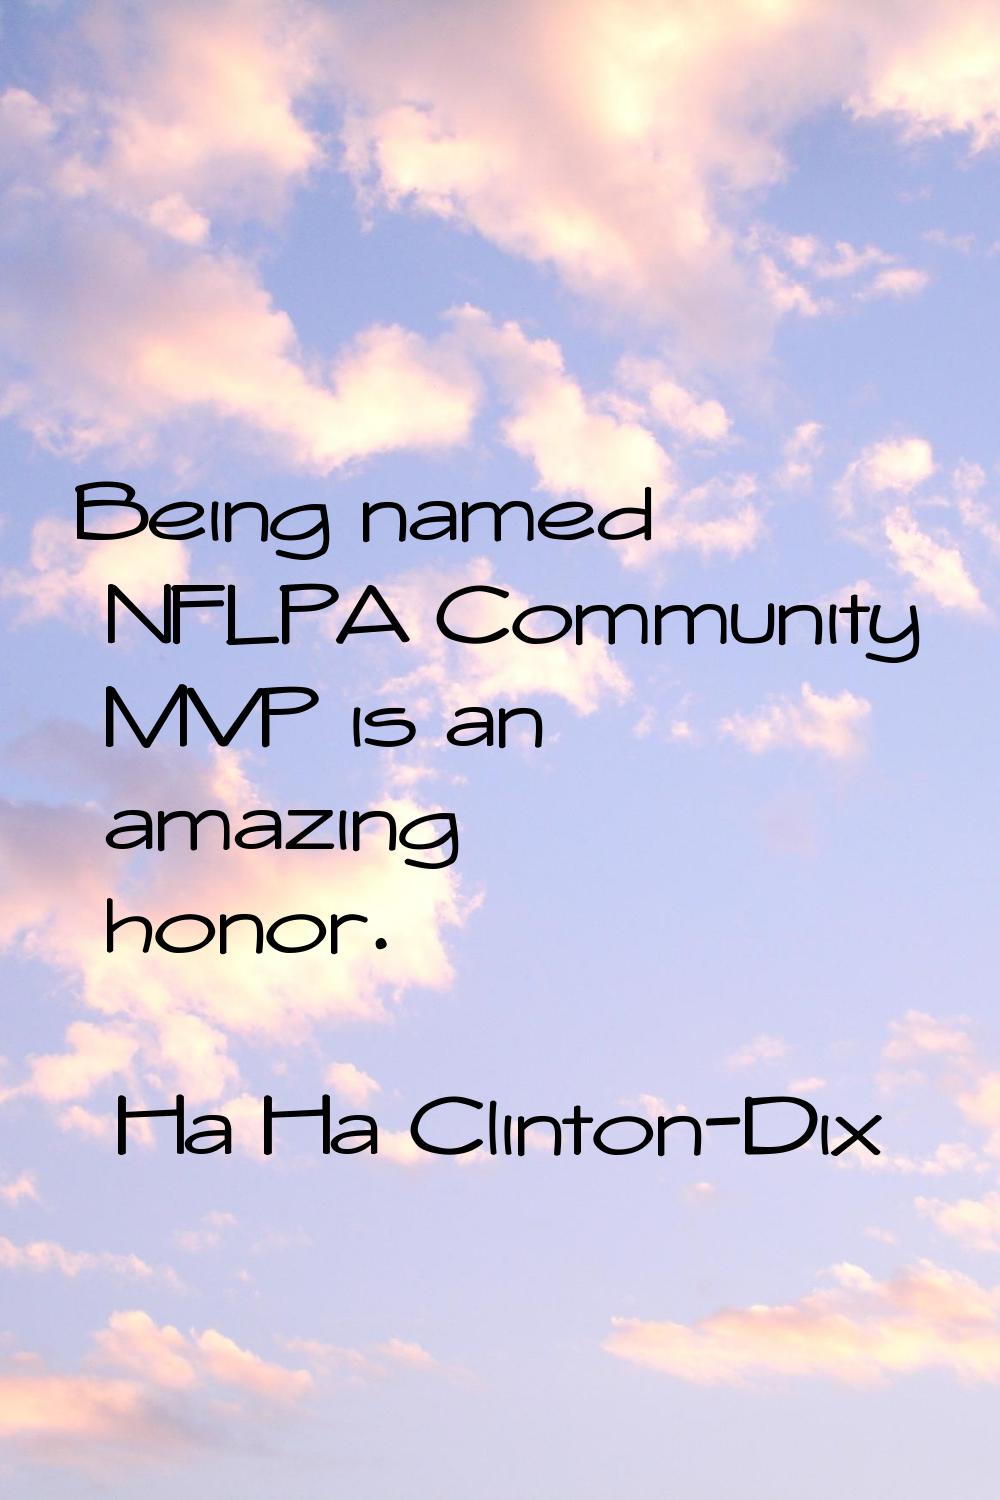 Being named NFLPA Community MVP is an amazing honor.